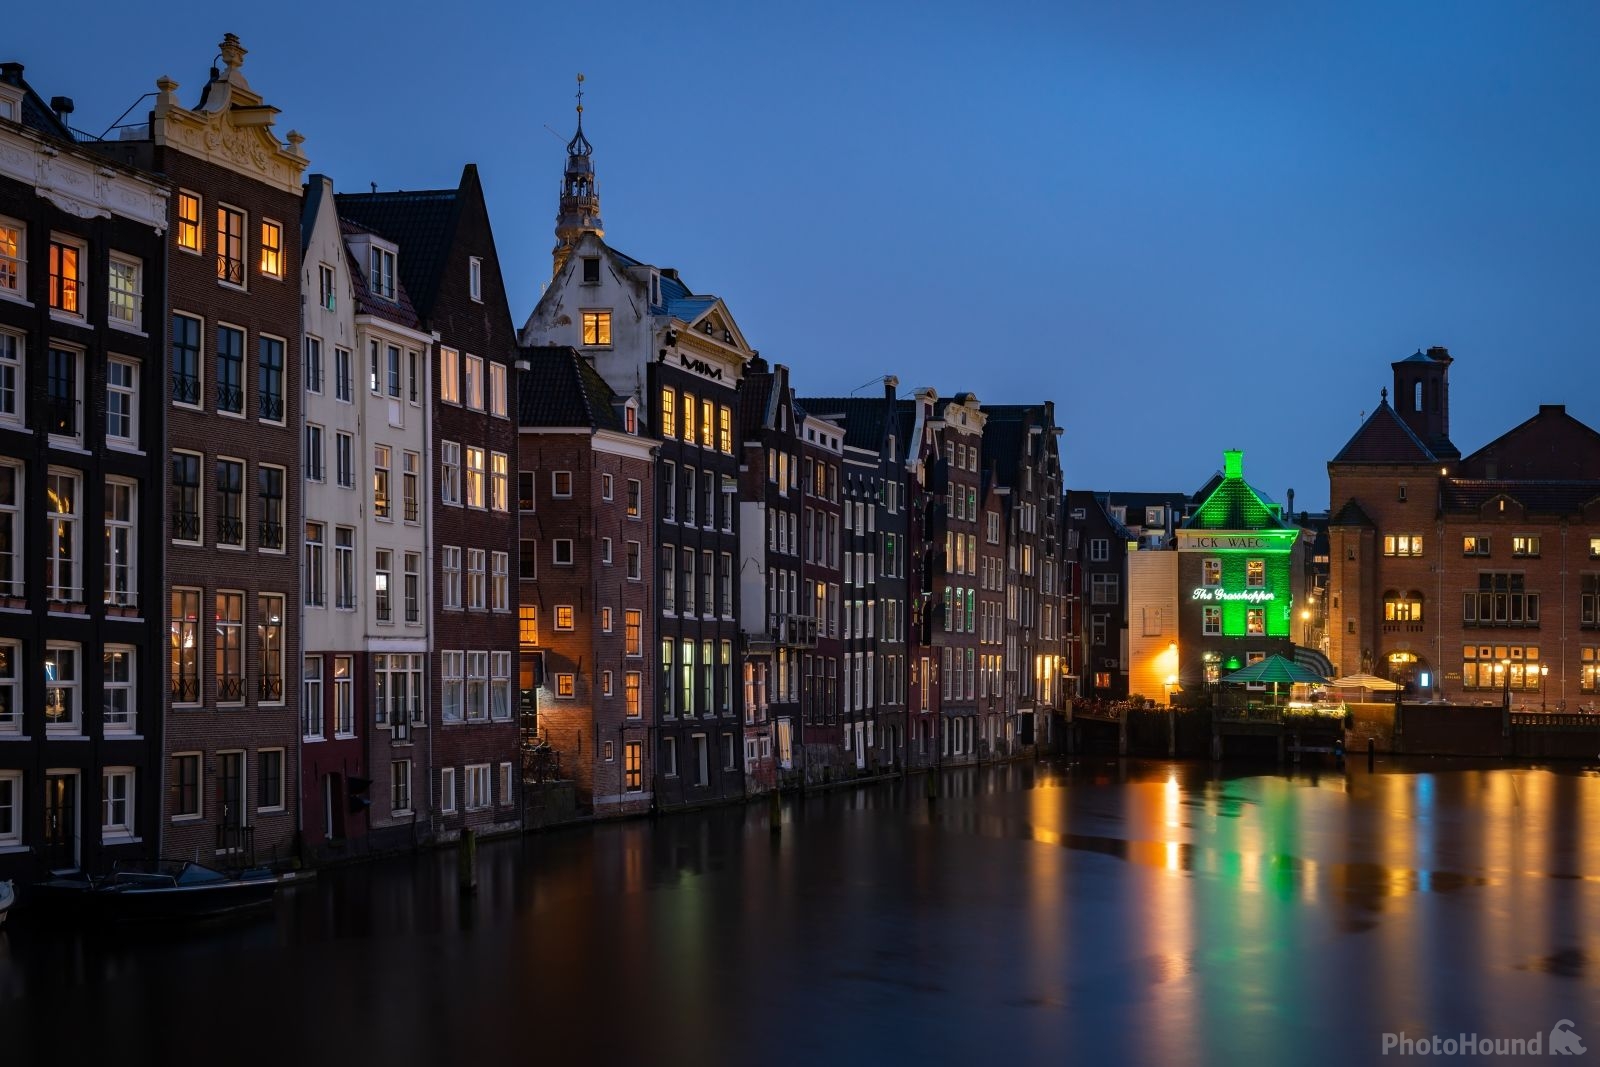 Image of Houses in the Damrak, Amsterdam by VOJTa Herout